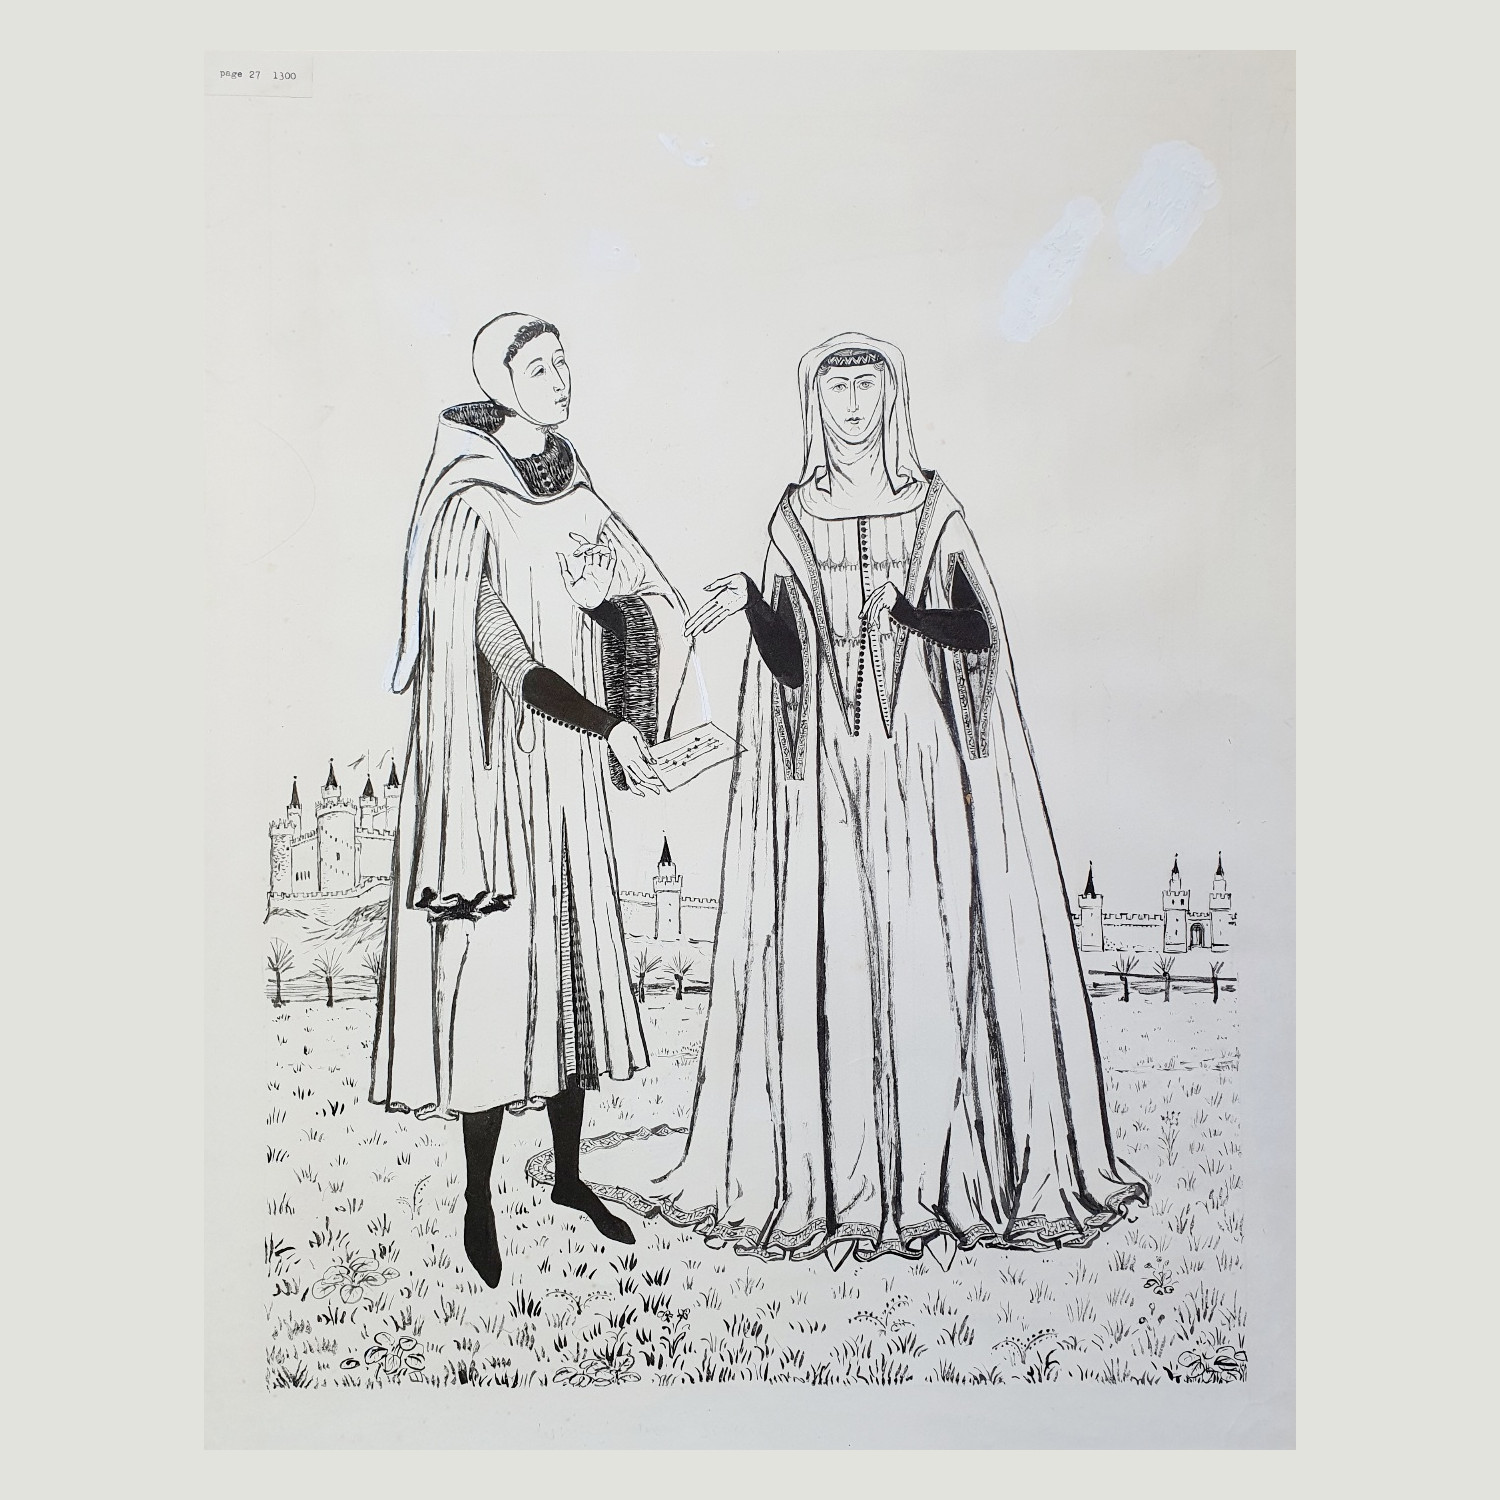 Original drawing by Margot Hamilton Hill depicting fashions from the reign of Edward I, 1300